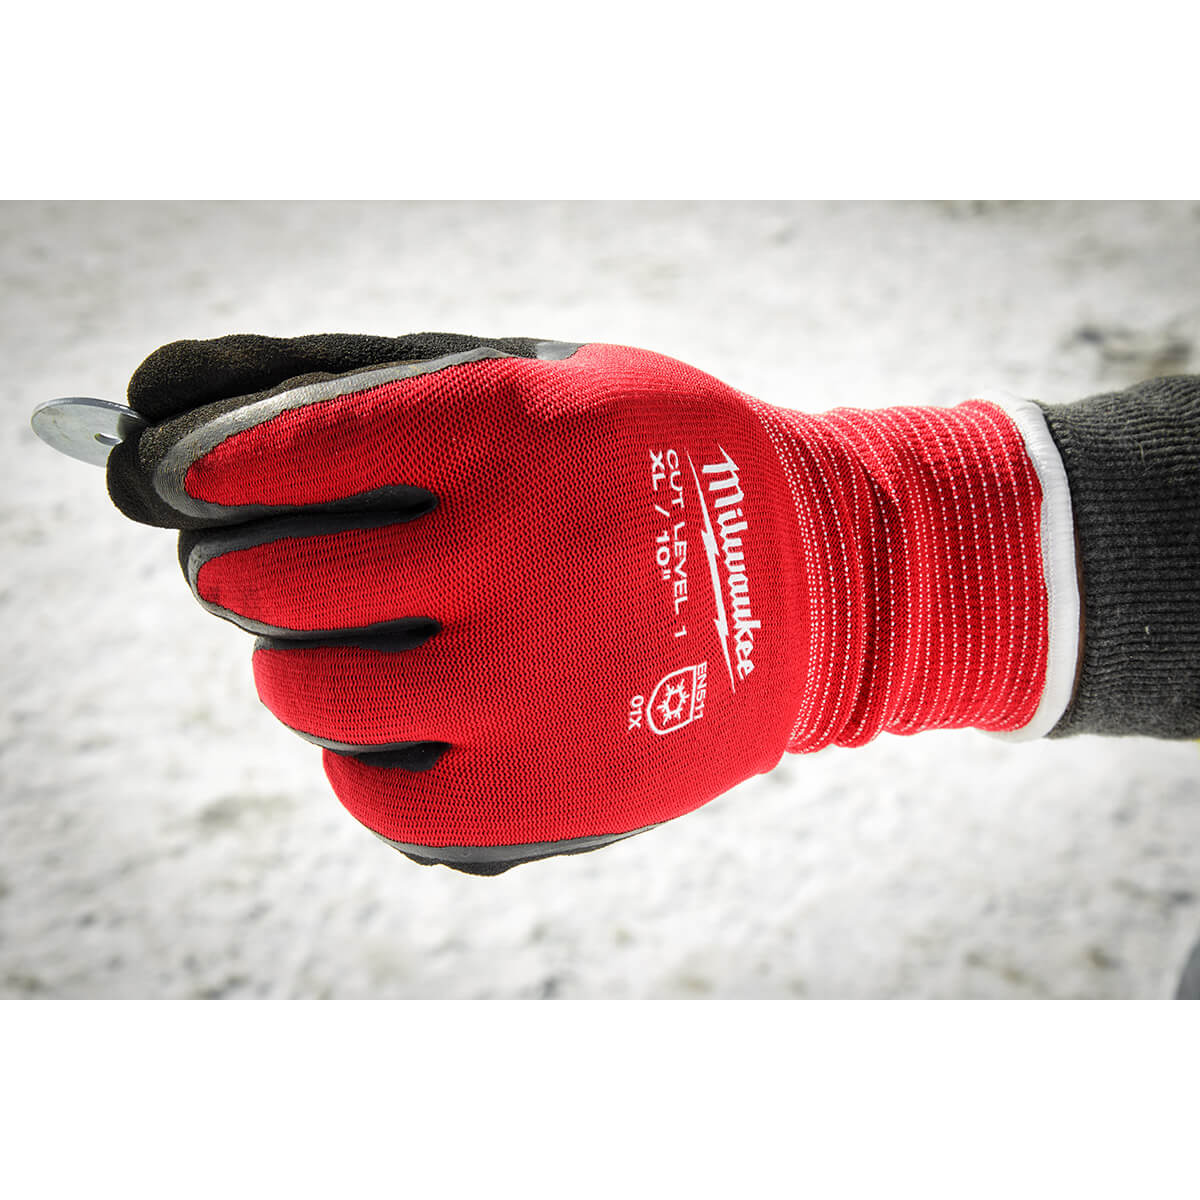 Milwaukee Cut Level 1 Insulated Gloves - XL - wise-line-tools